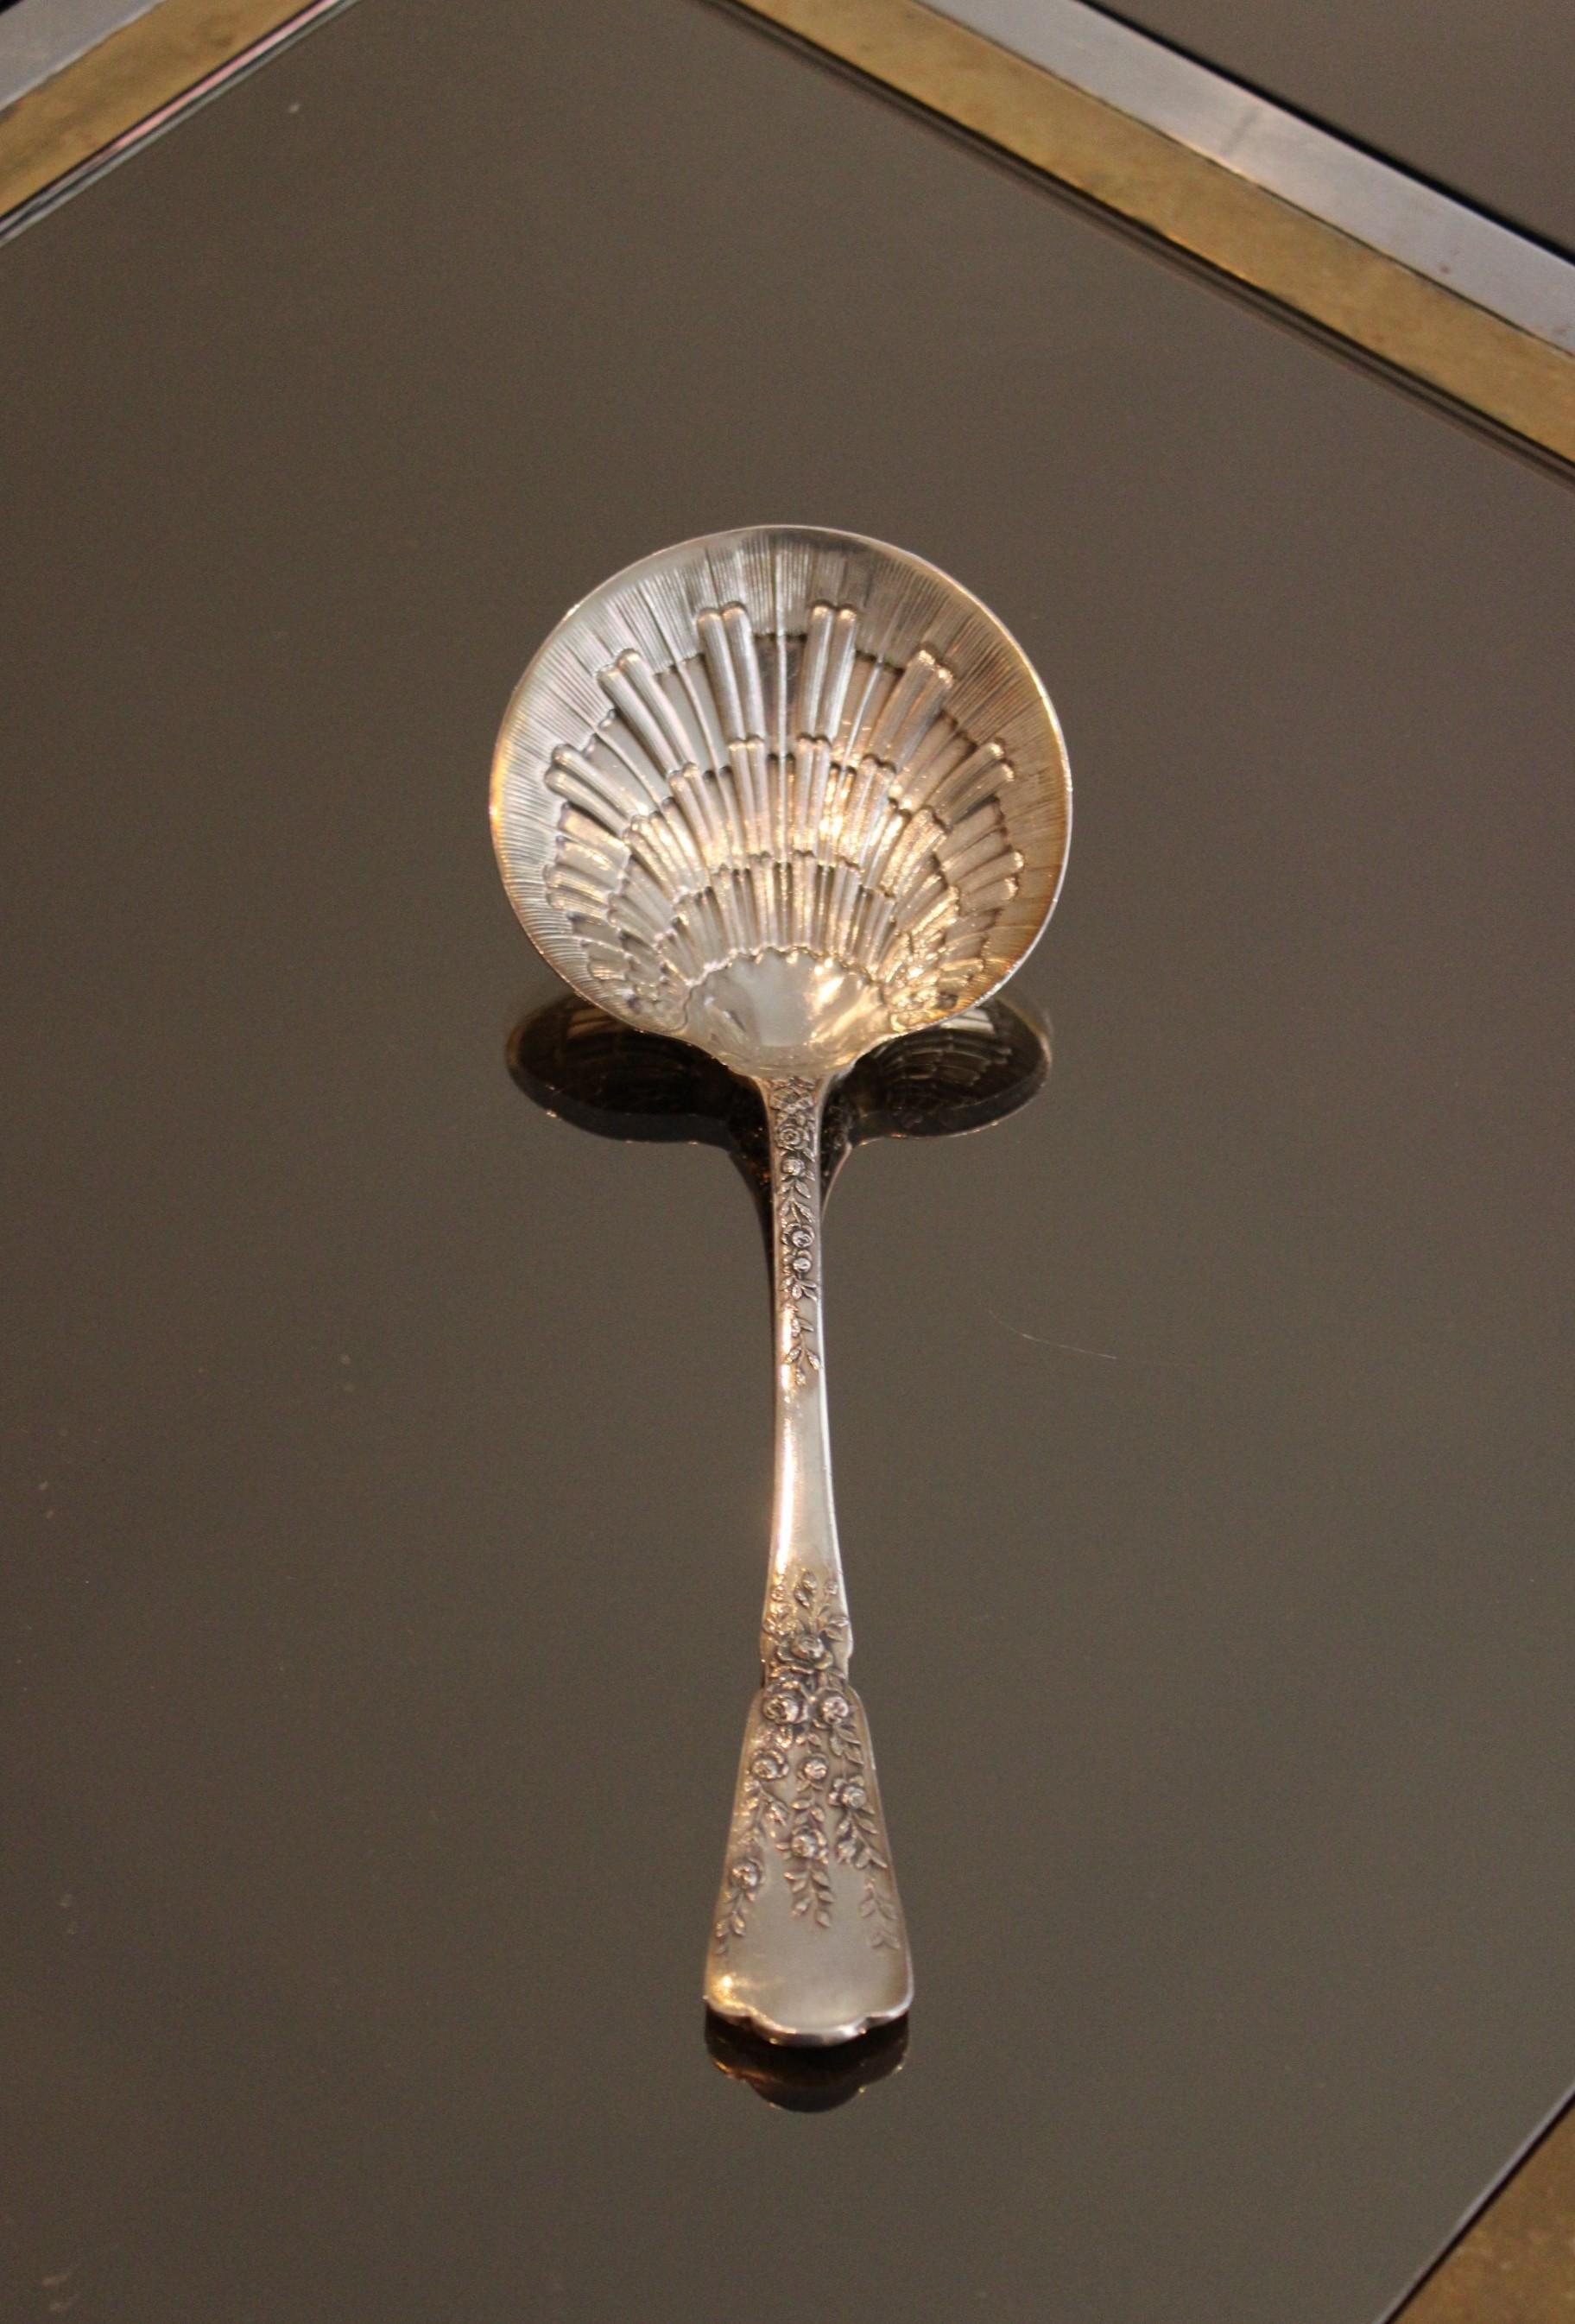 Solid silver spoon, 19th century.
Shell-shaped spoon, floral pattern on the handle.
Hallmark Minerva.

Weight : 110g